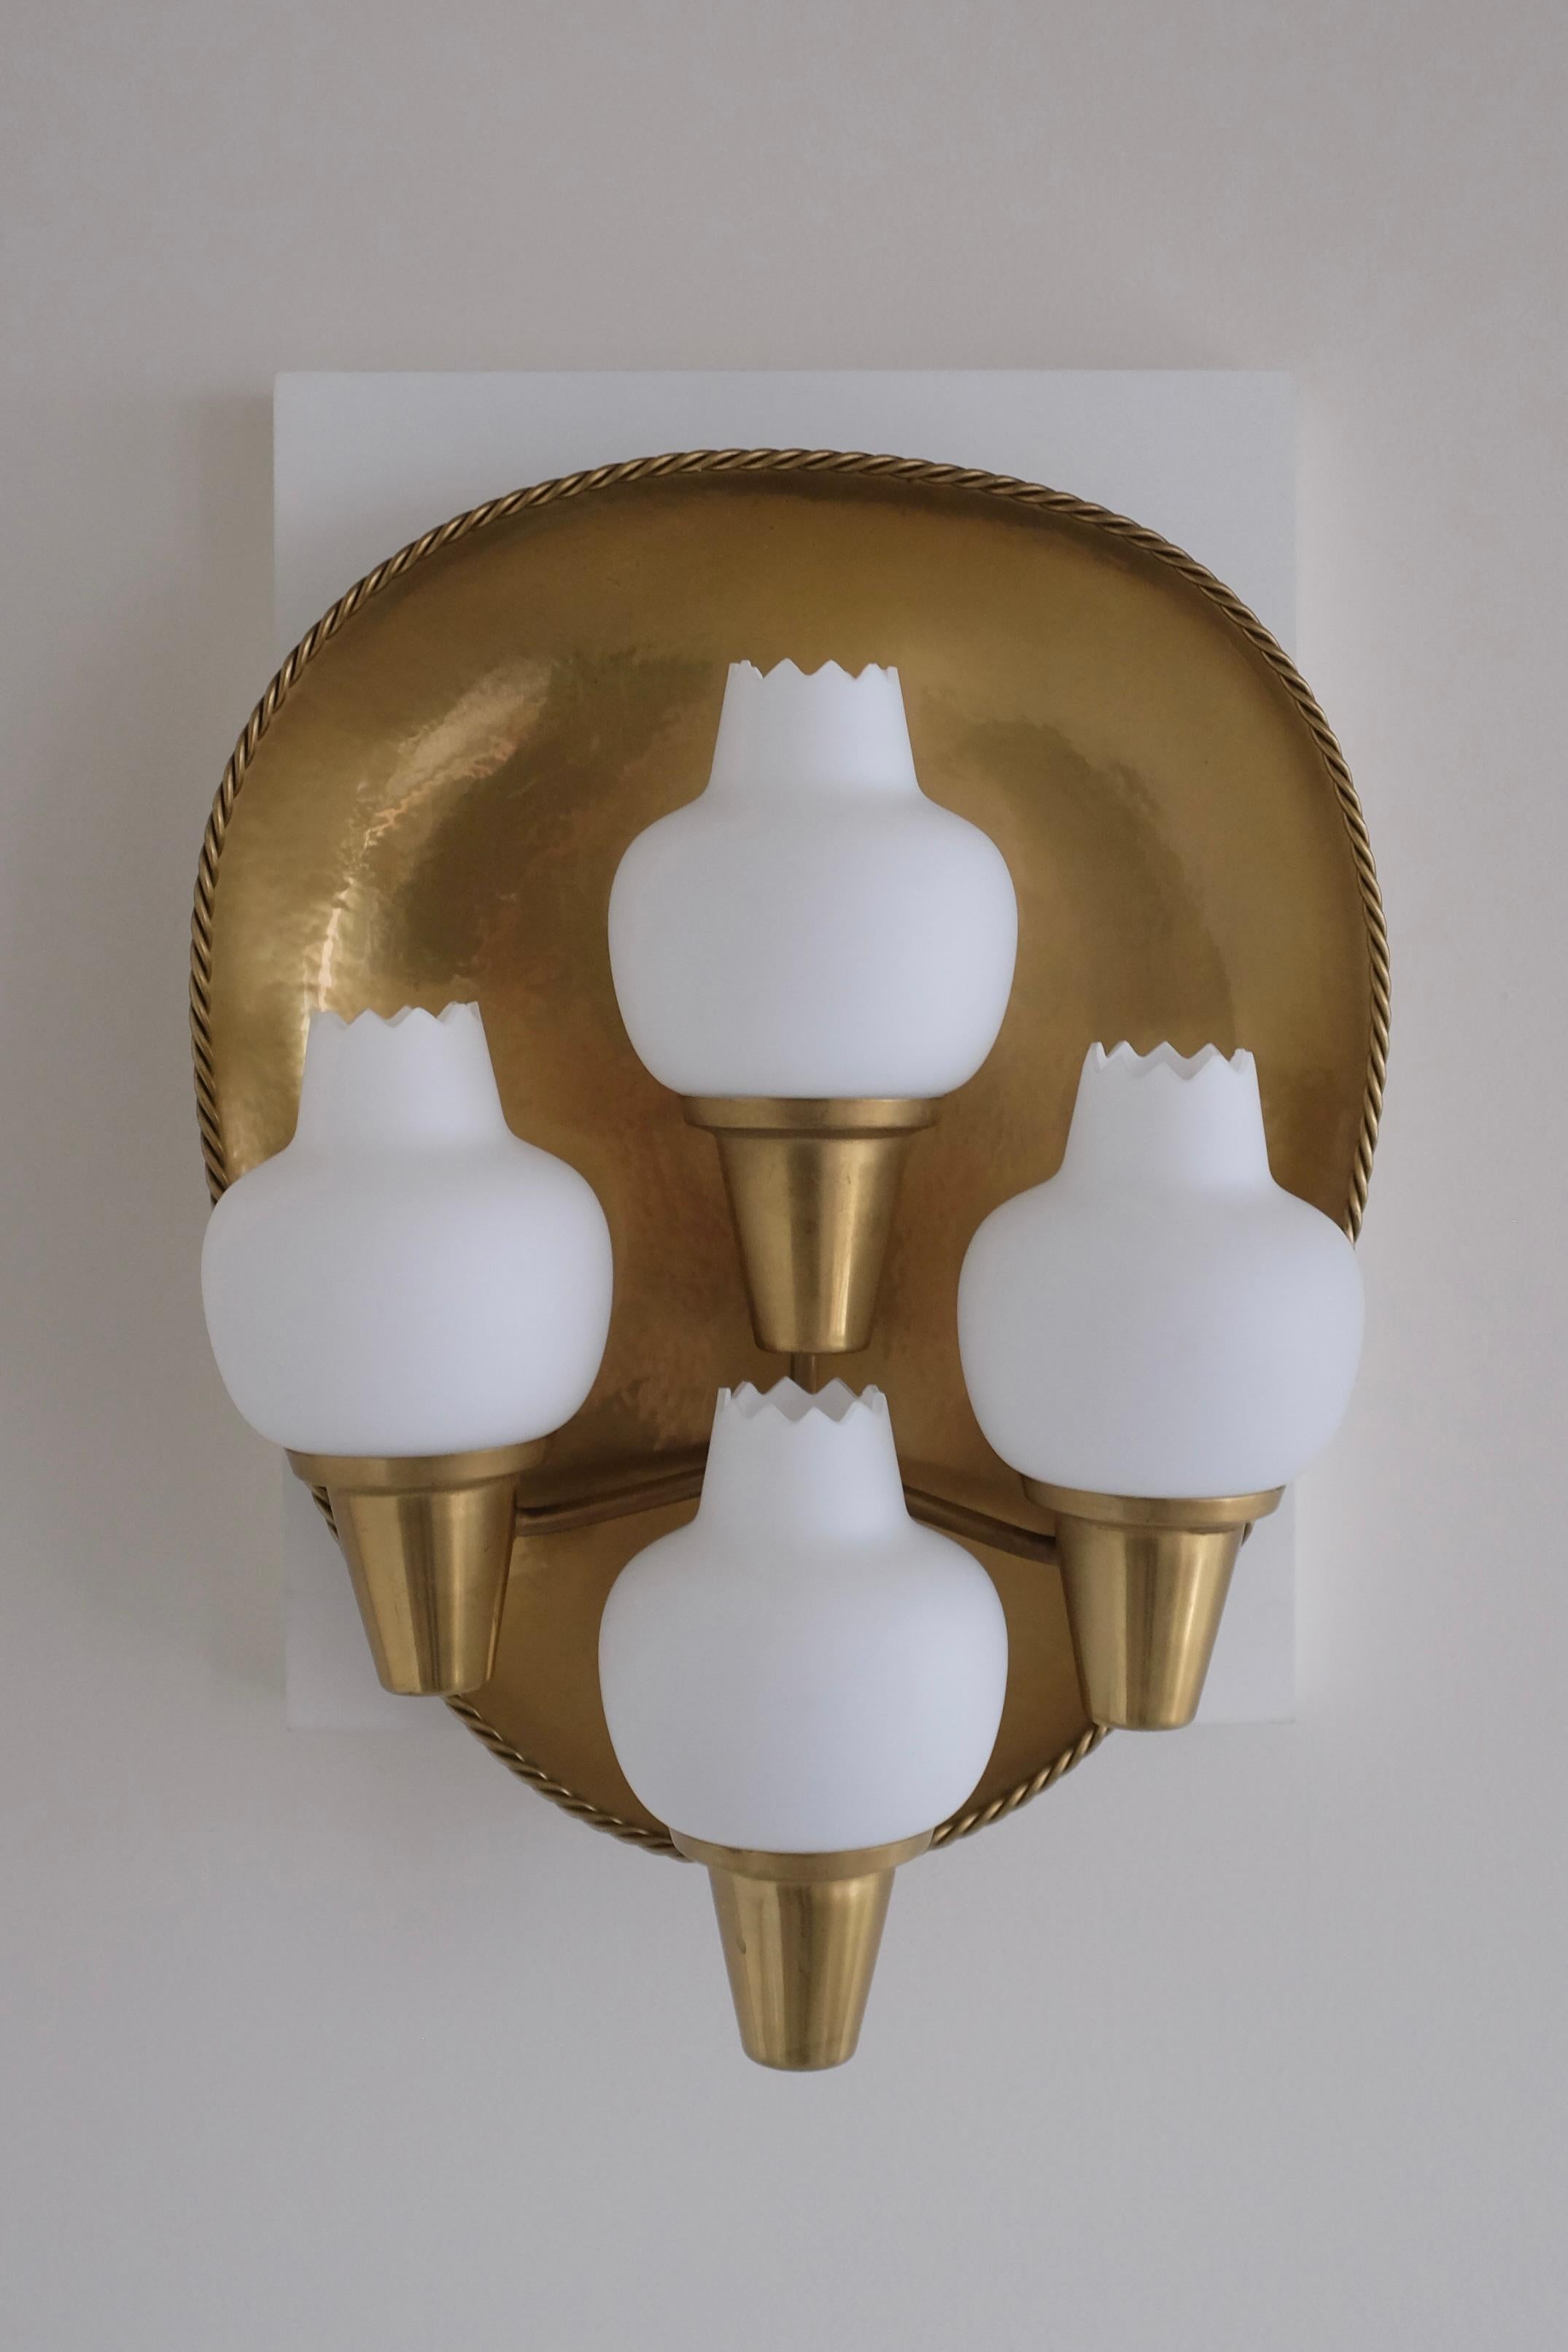 Stunning and rare wall scone in model 405 by Ateljé Lyktan, Sweden. A large brass back with a beautiful twisted pattern around the border holds 4 lamp arms each with a white opaline glas lantern. Produced around the 1940/50s and possible designed by